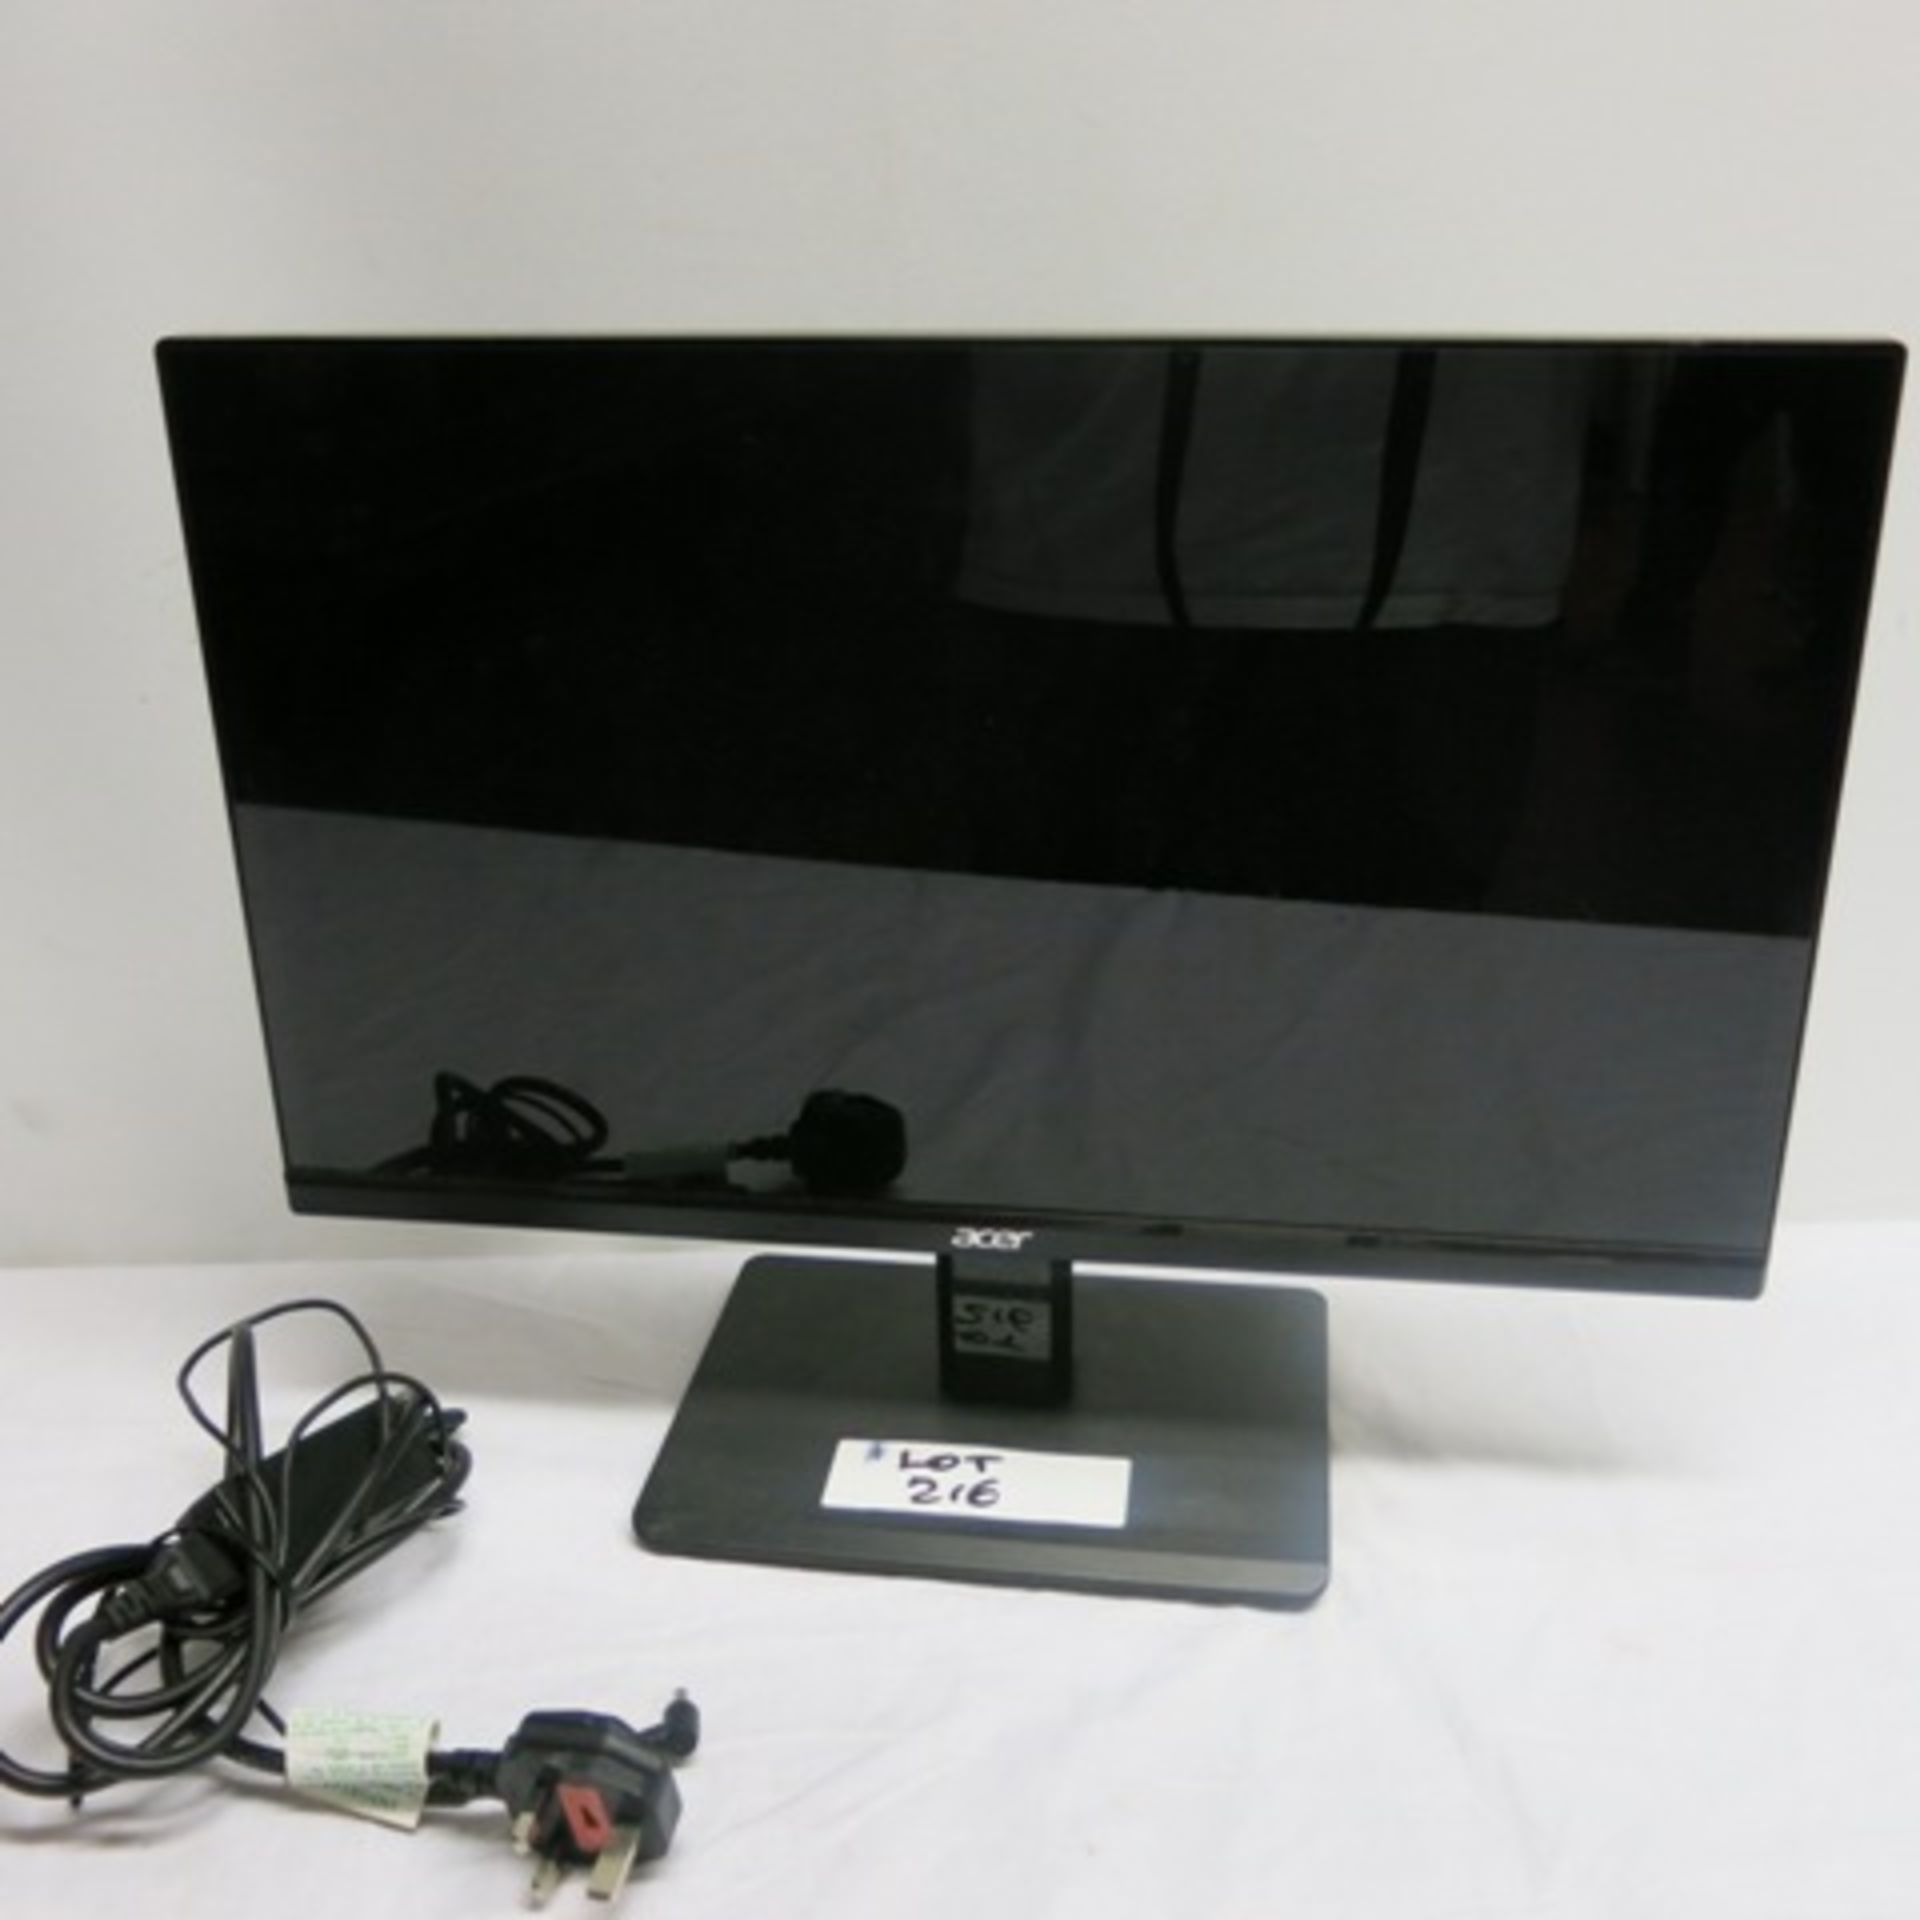 Acer 22" LCD Monitor, Model H226HQL with Power Supply